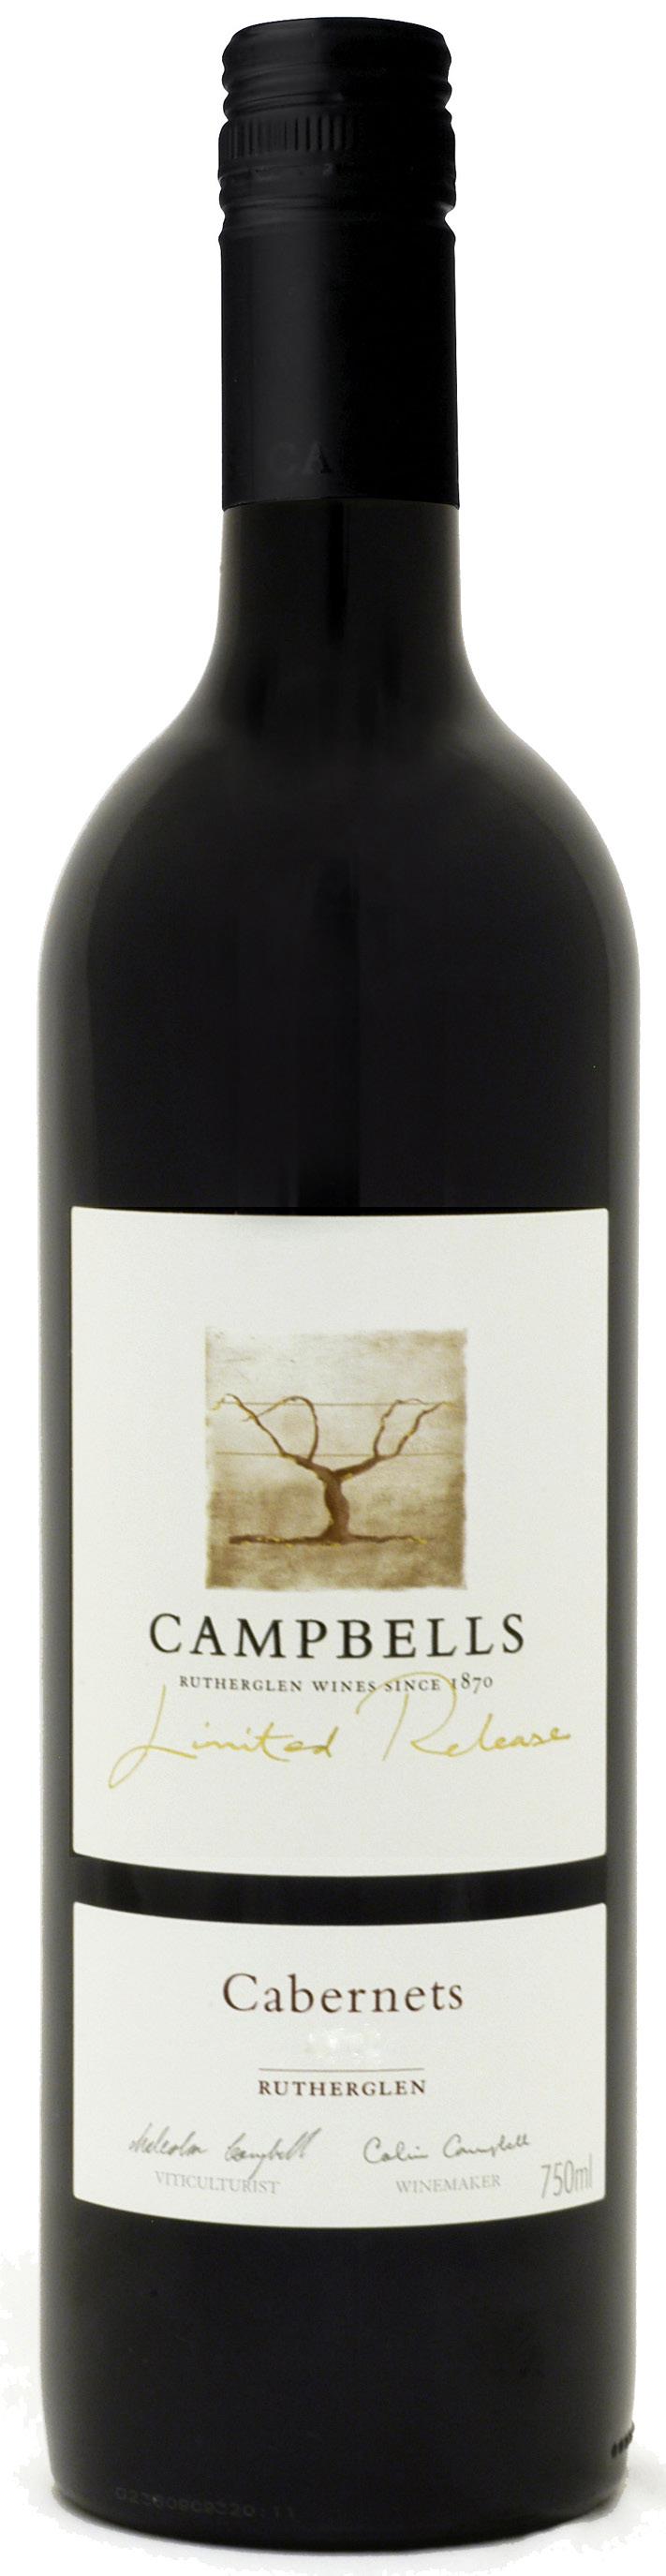 CABERNETS 2007 LIMITED RELEASE Our unique blend, with cabernet sauvignon providing striking lifted aromas and middle palate flavour to complement the length of flavour and fine tannins of the ruby